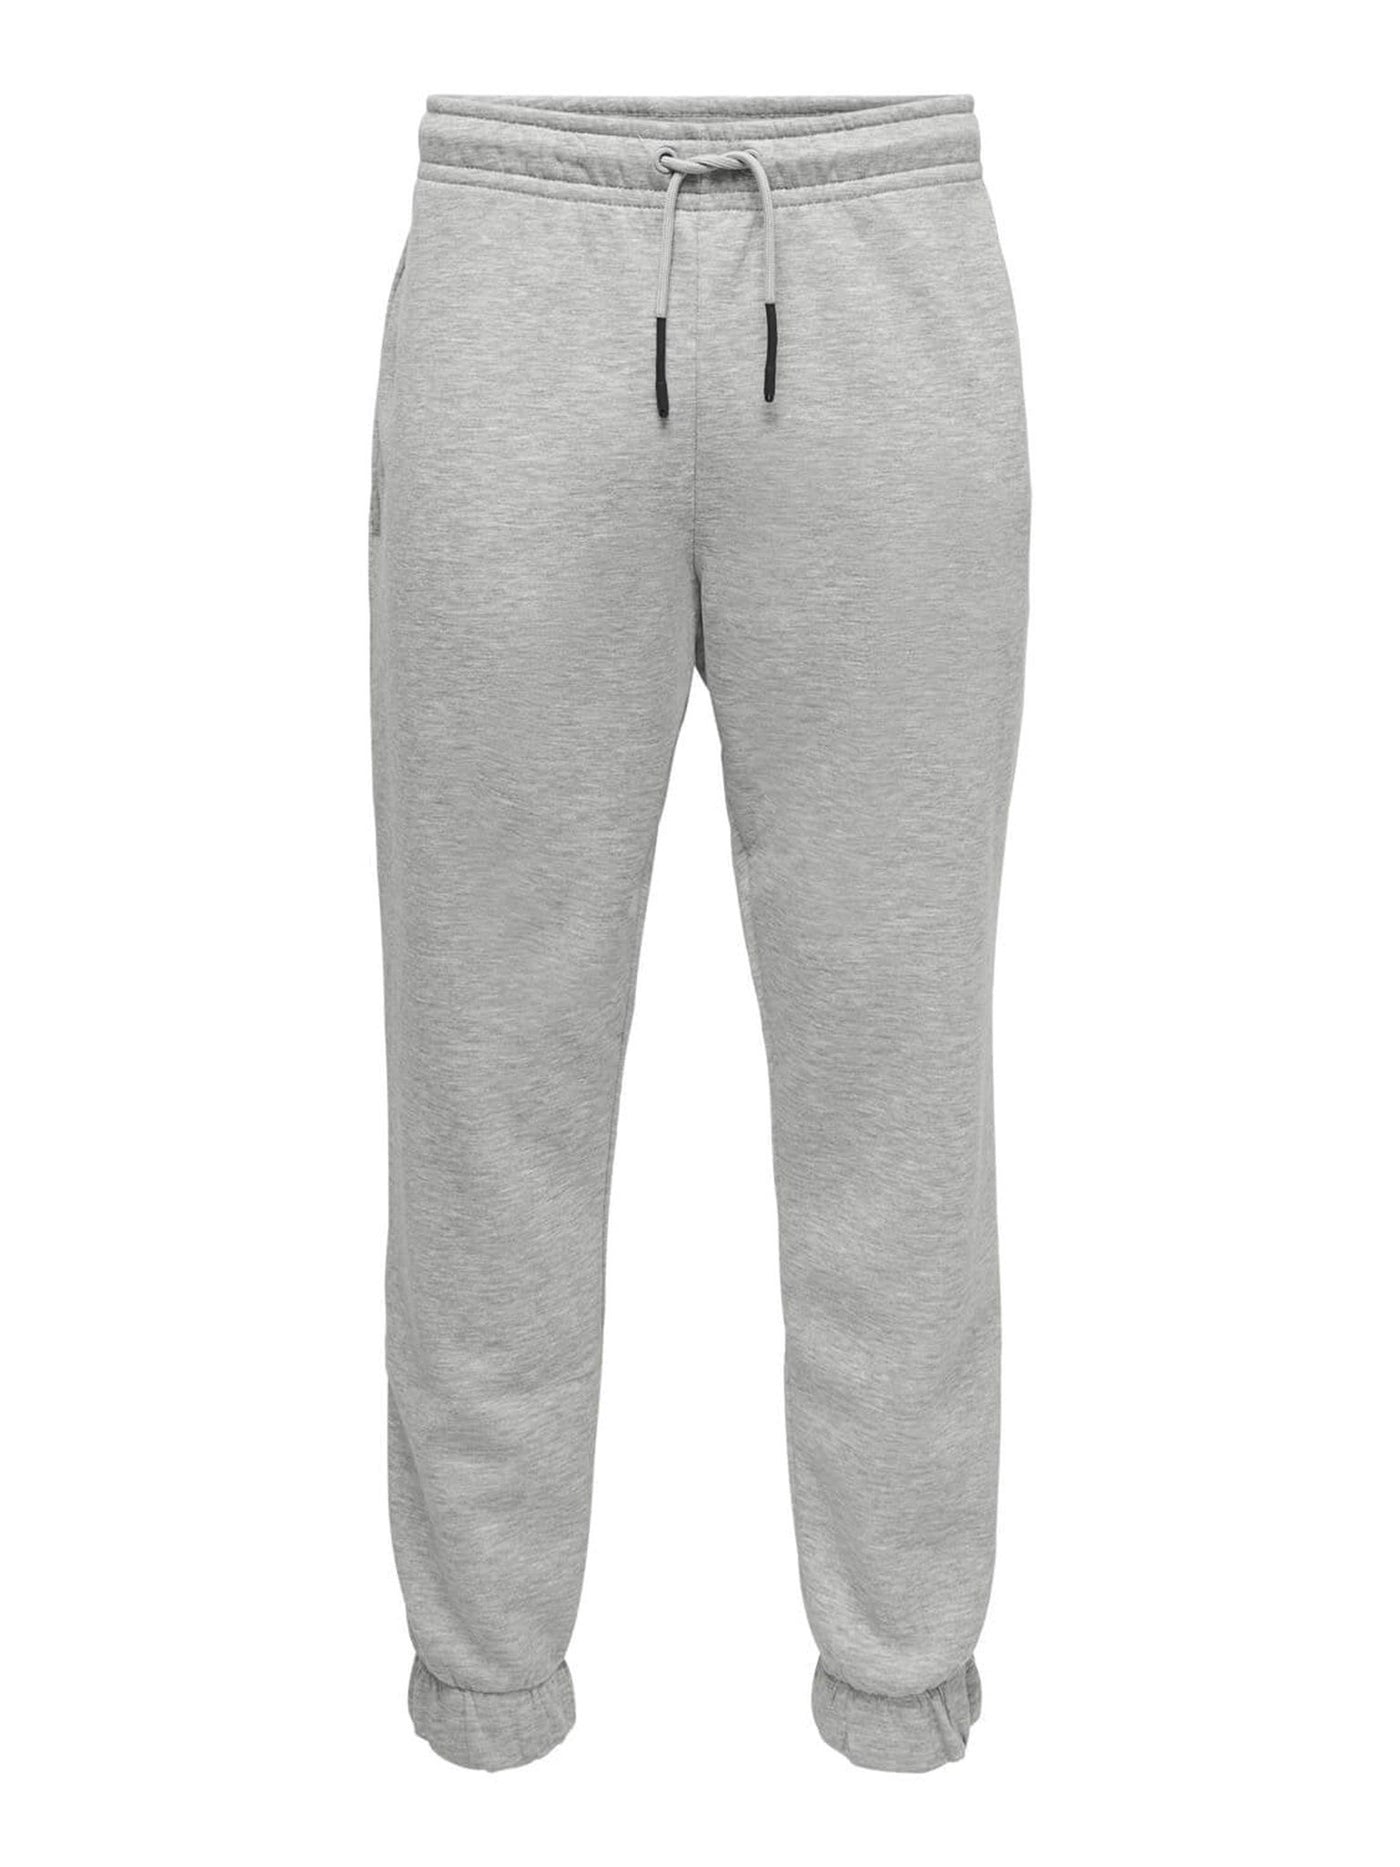 Classic Sweatpants - Lysegrå - Only & Sons - Grå